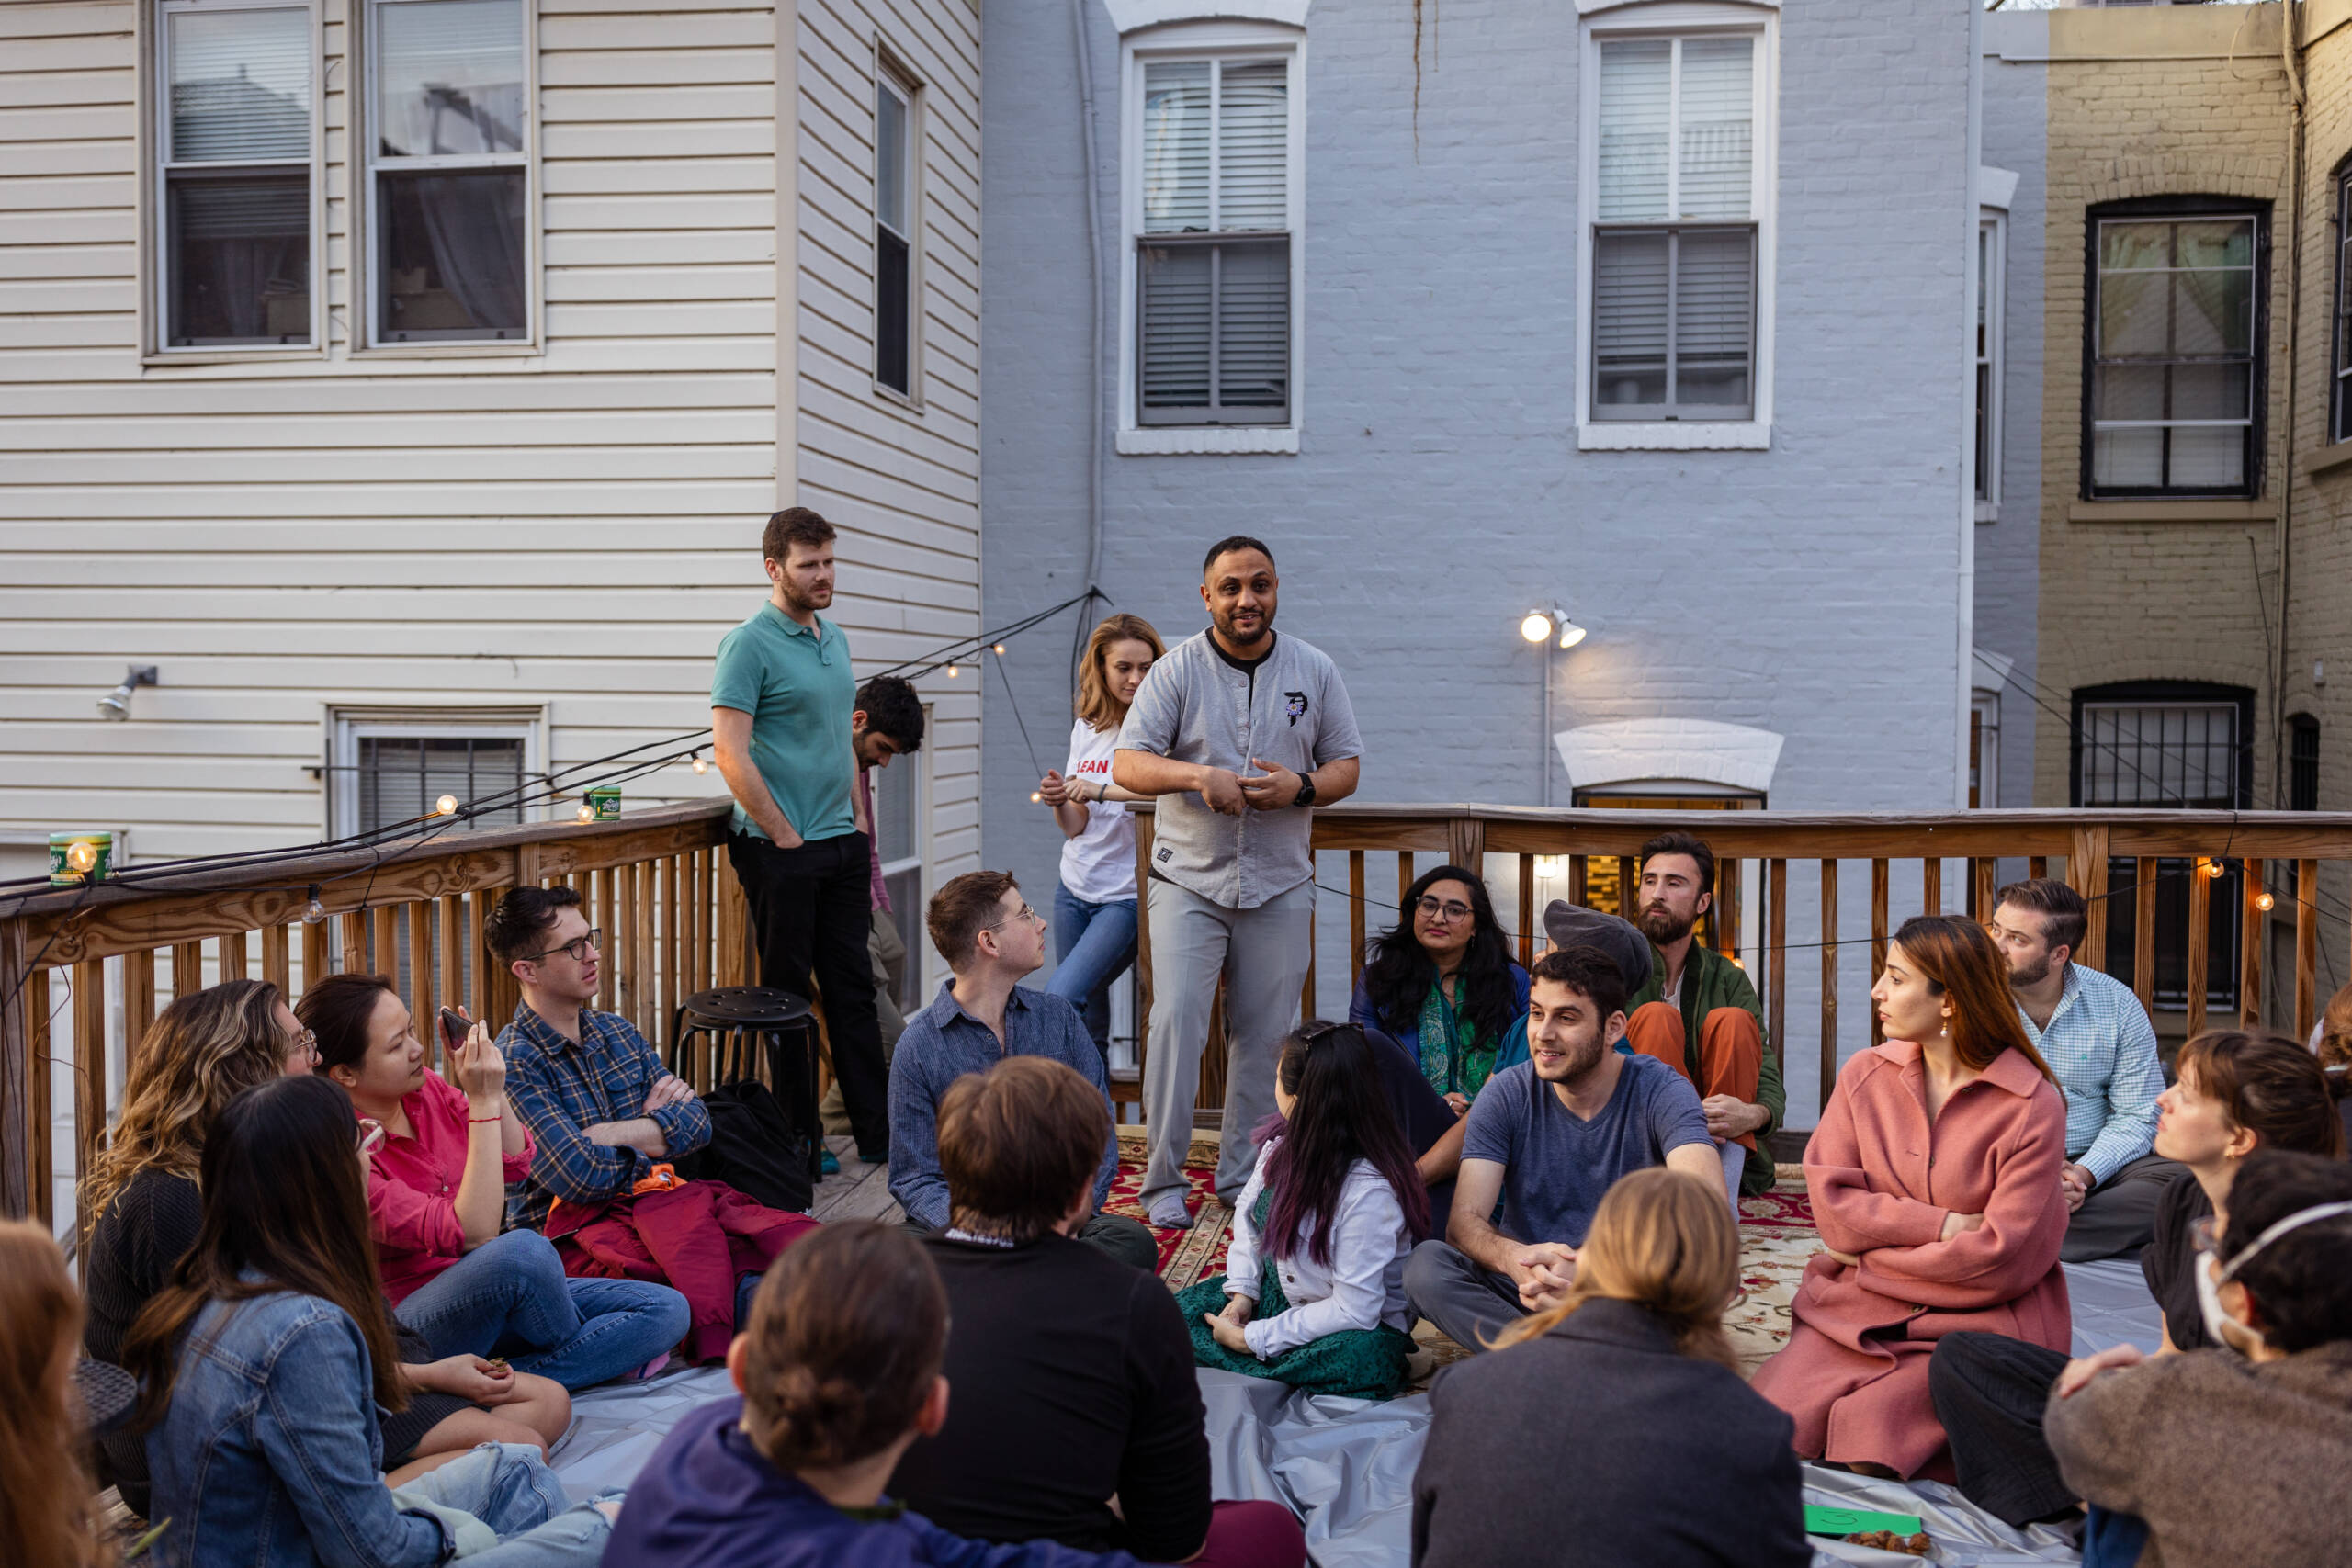 Abrahamic House gathering, people of different ethnicities on an urban back deck